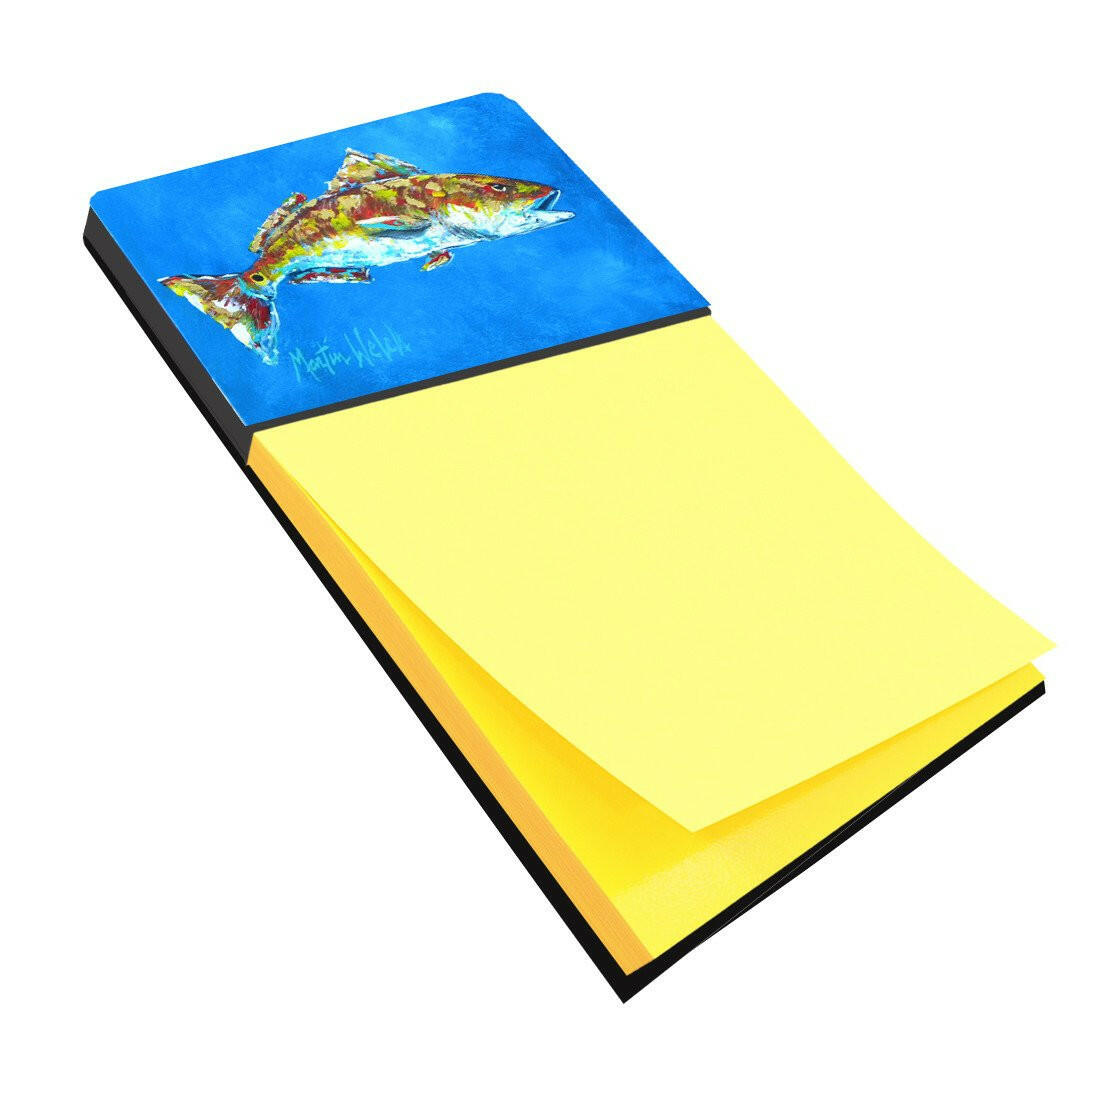 Fish - Red Fish Seafood Two Refiillable Sticky Note Holder or Postit Note Dispenser MW1098SN by Caroline's Treasures